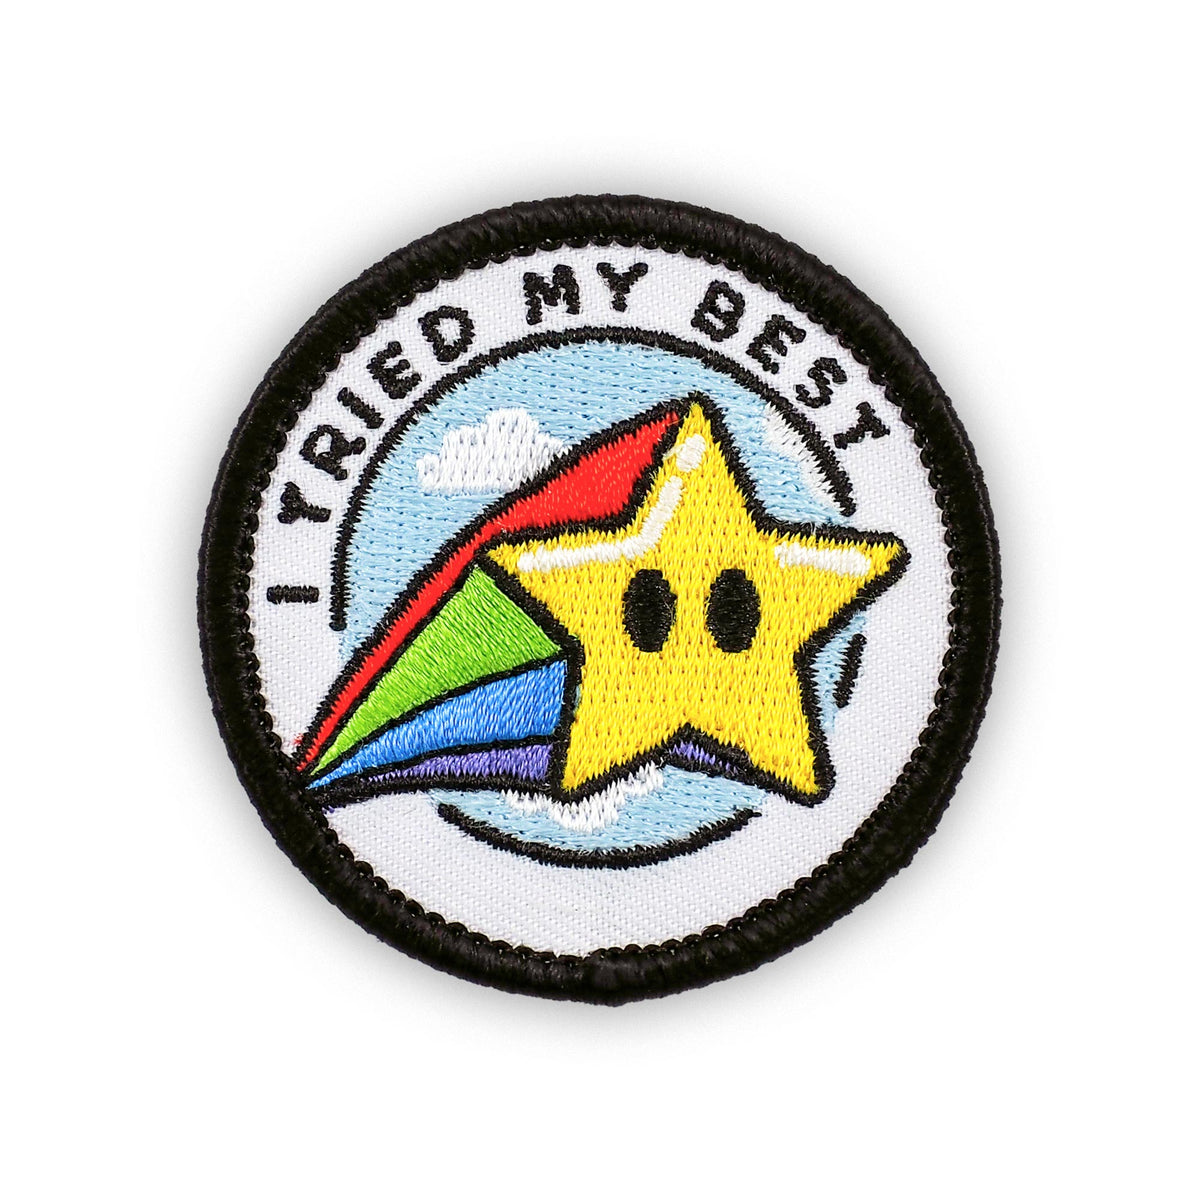 Winks For Days Adulting Merit Badge Embroidered Iron-On Patches (Funny -  Set 1) - Includes Three (3) 2” Patches: Avoided Confrontation, I Tried My